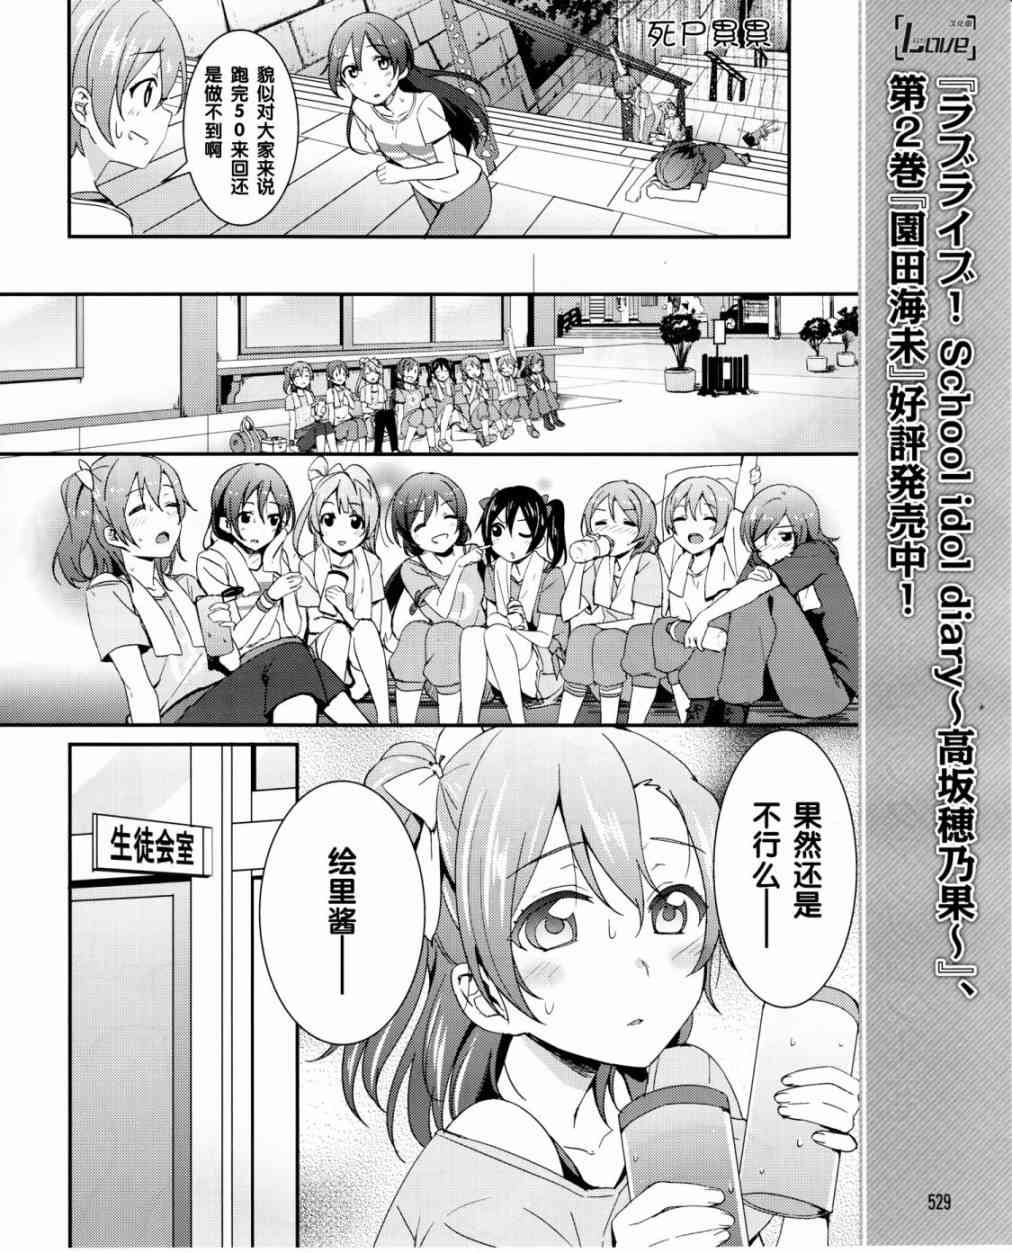 LoveLive - 17話 - 3